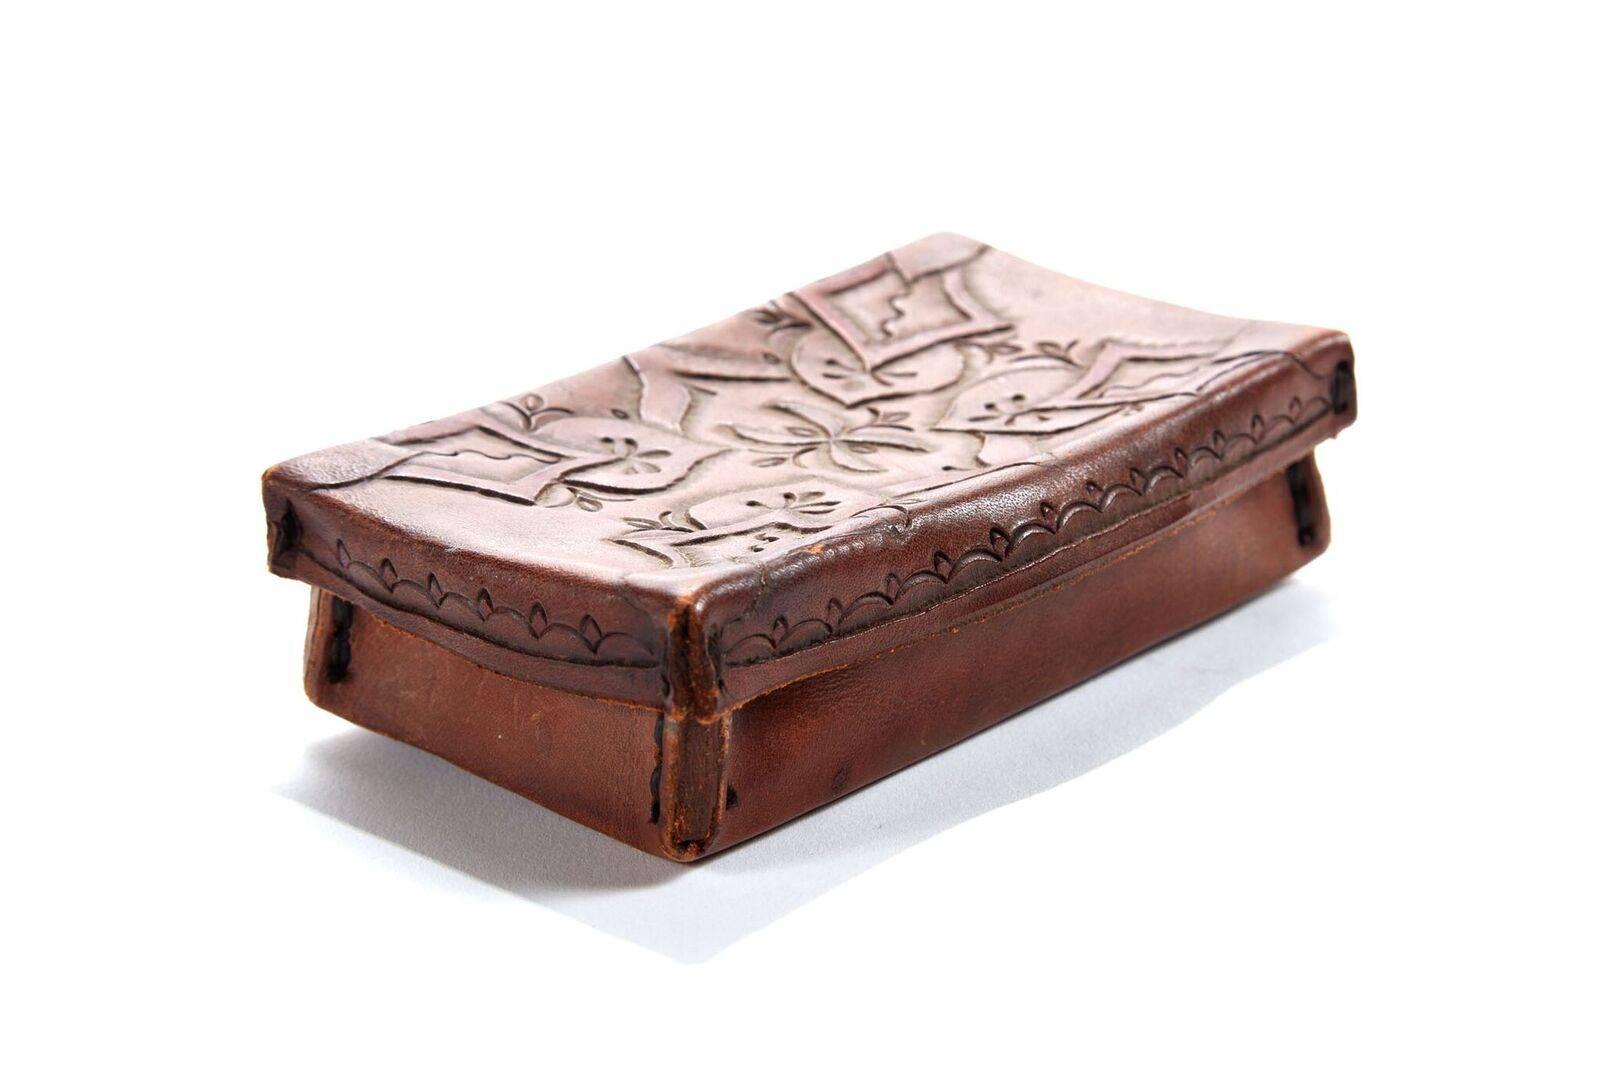 Early 20th century small tooled leather box from Mexico
This small box has lovely tooled workmanship and its clearly handmade with care

Measure: 5.5